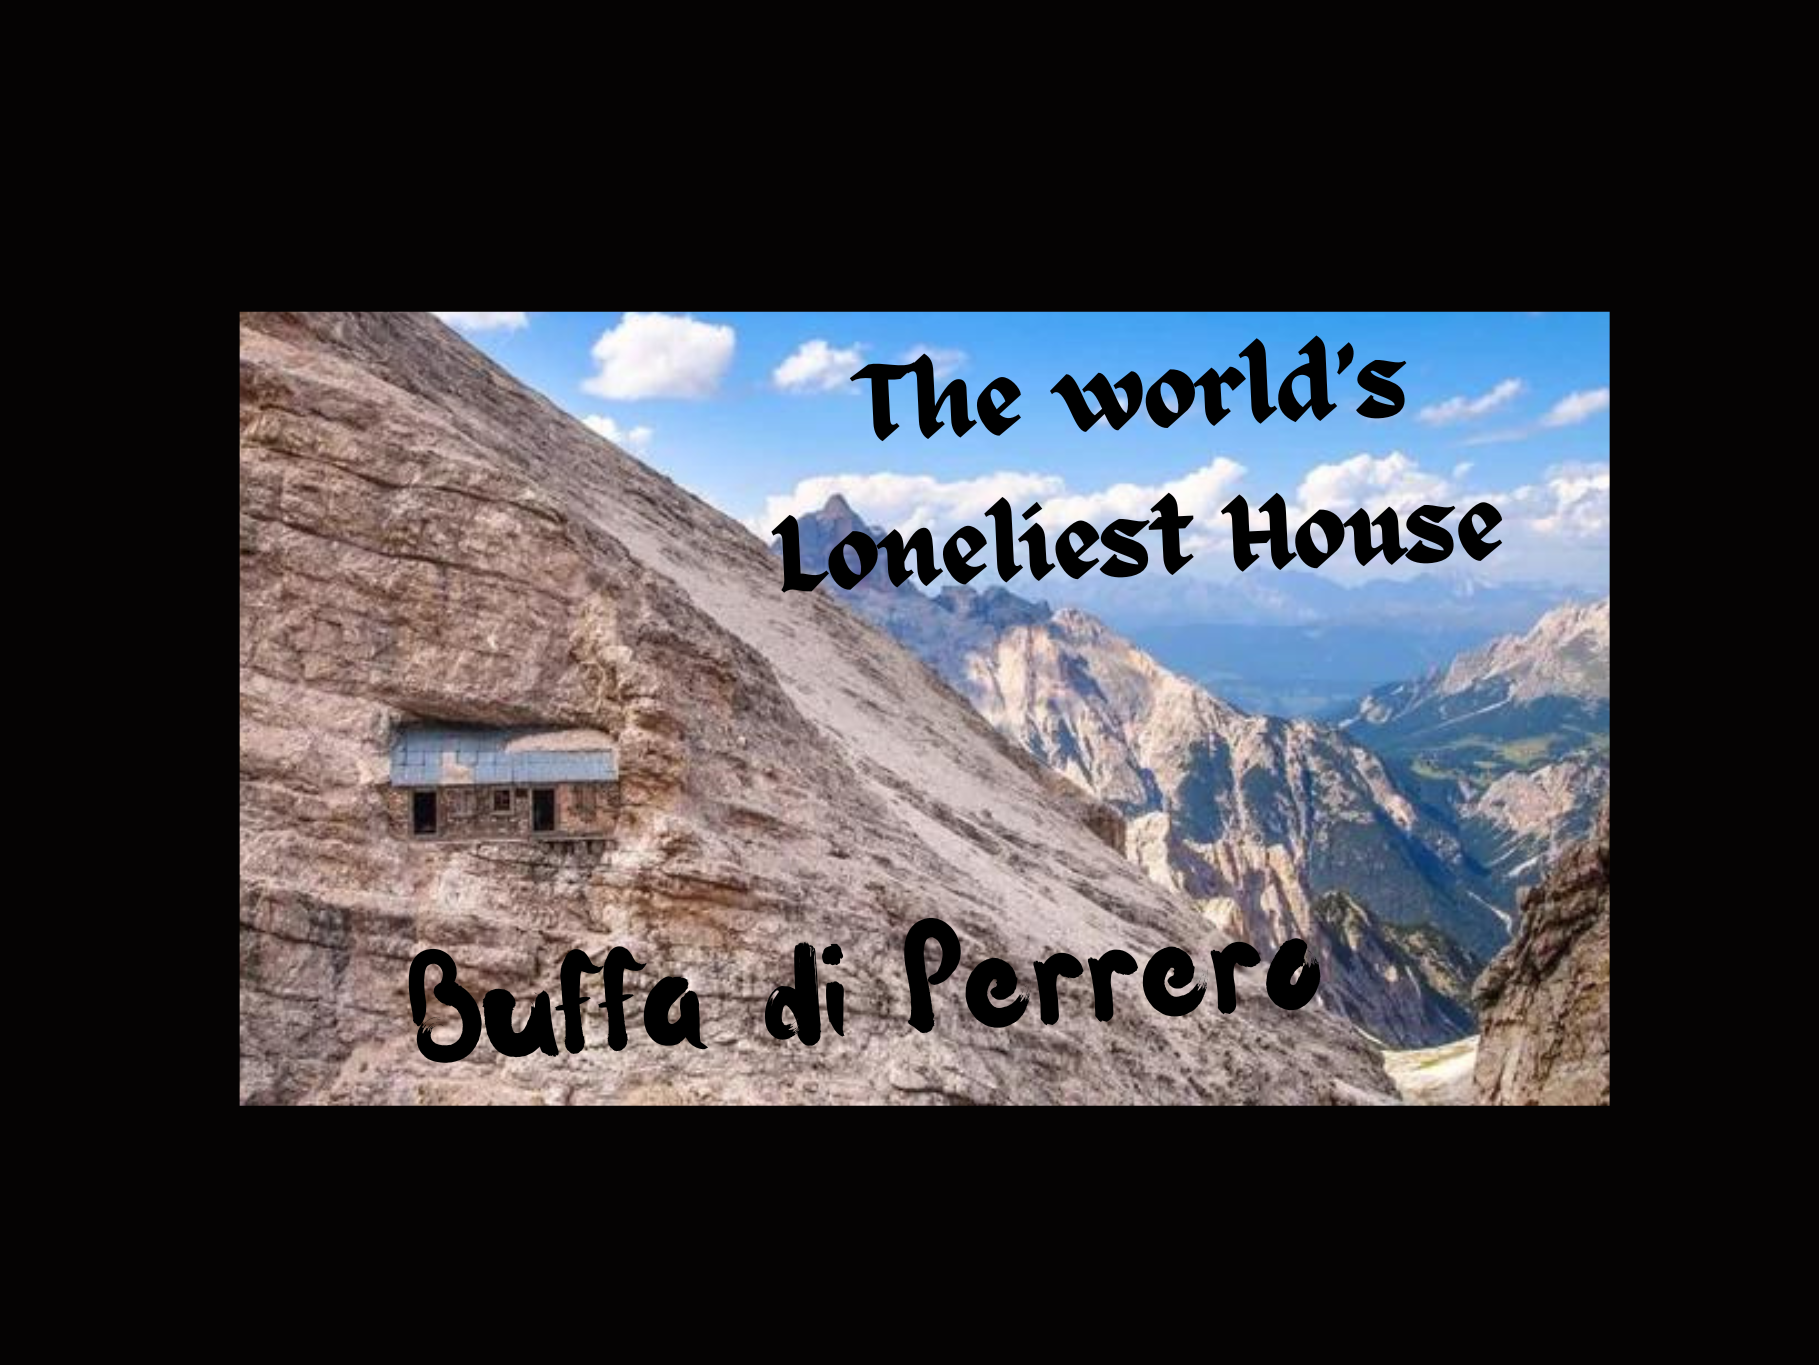 Unknown facts about Buffa Di Perrero, The World’s Loneliest House